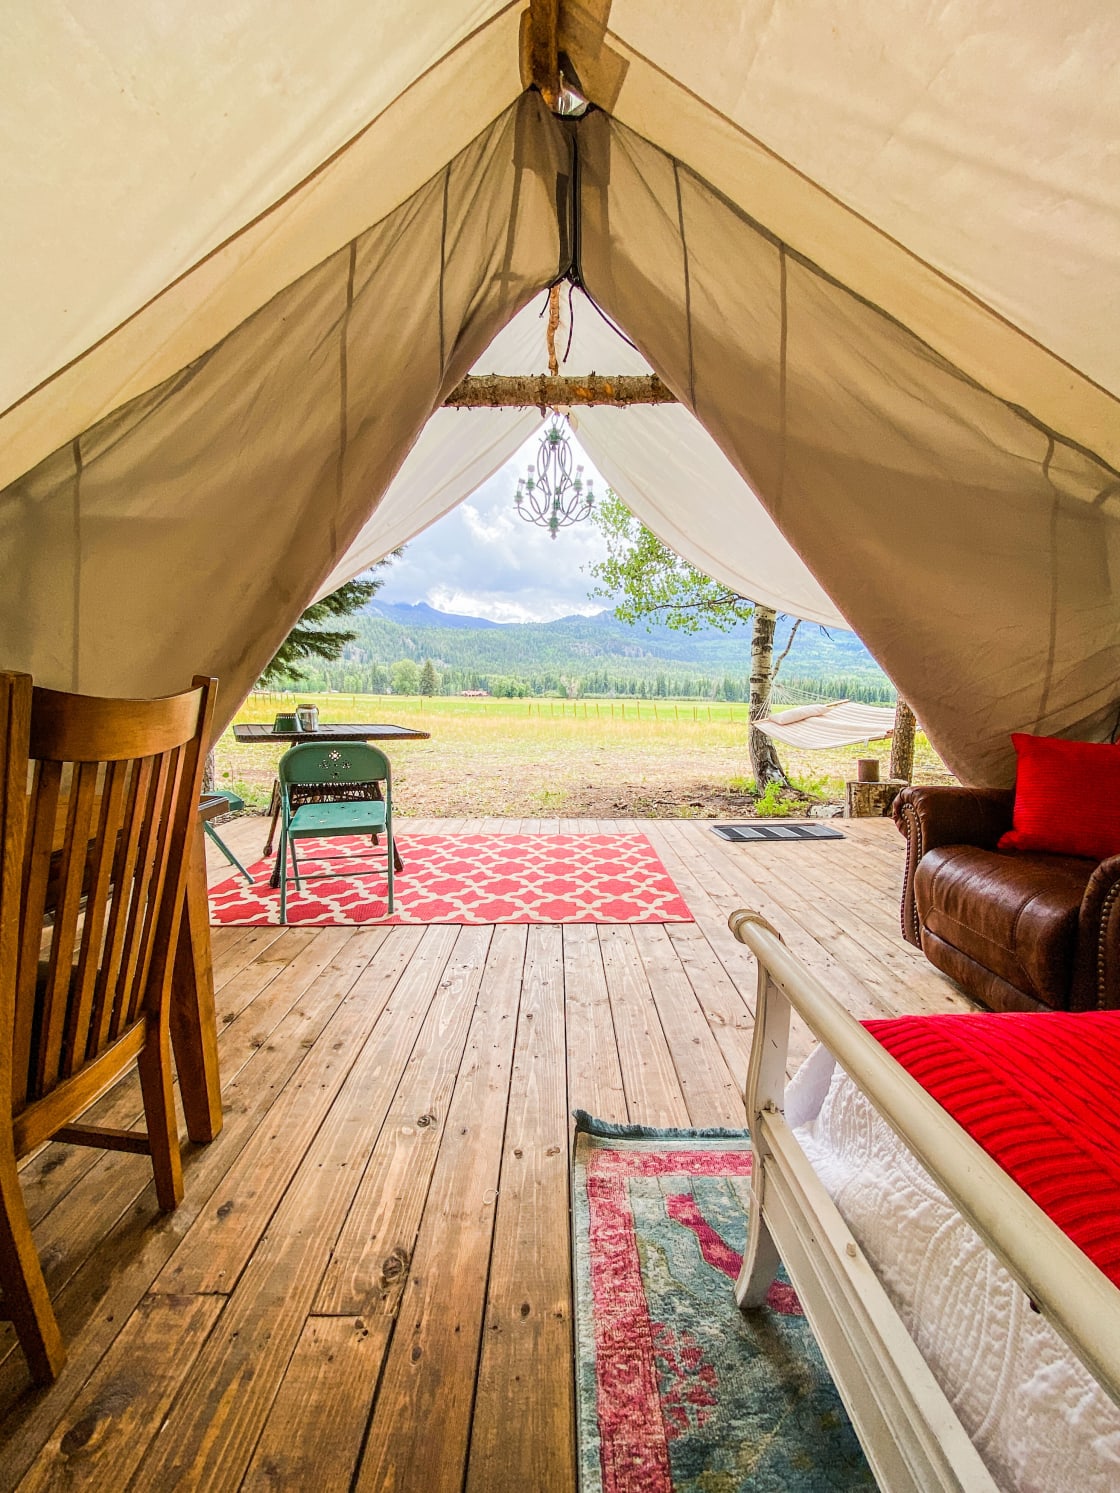 Caruso Tent [sleeps 6] outfitted with two queens and two twin beds featuring luxury linens, soft bath towels and battery-operated candles. Bring flashlights for additional lighting.